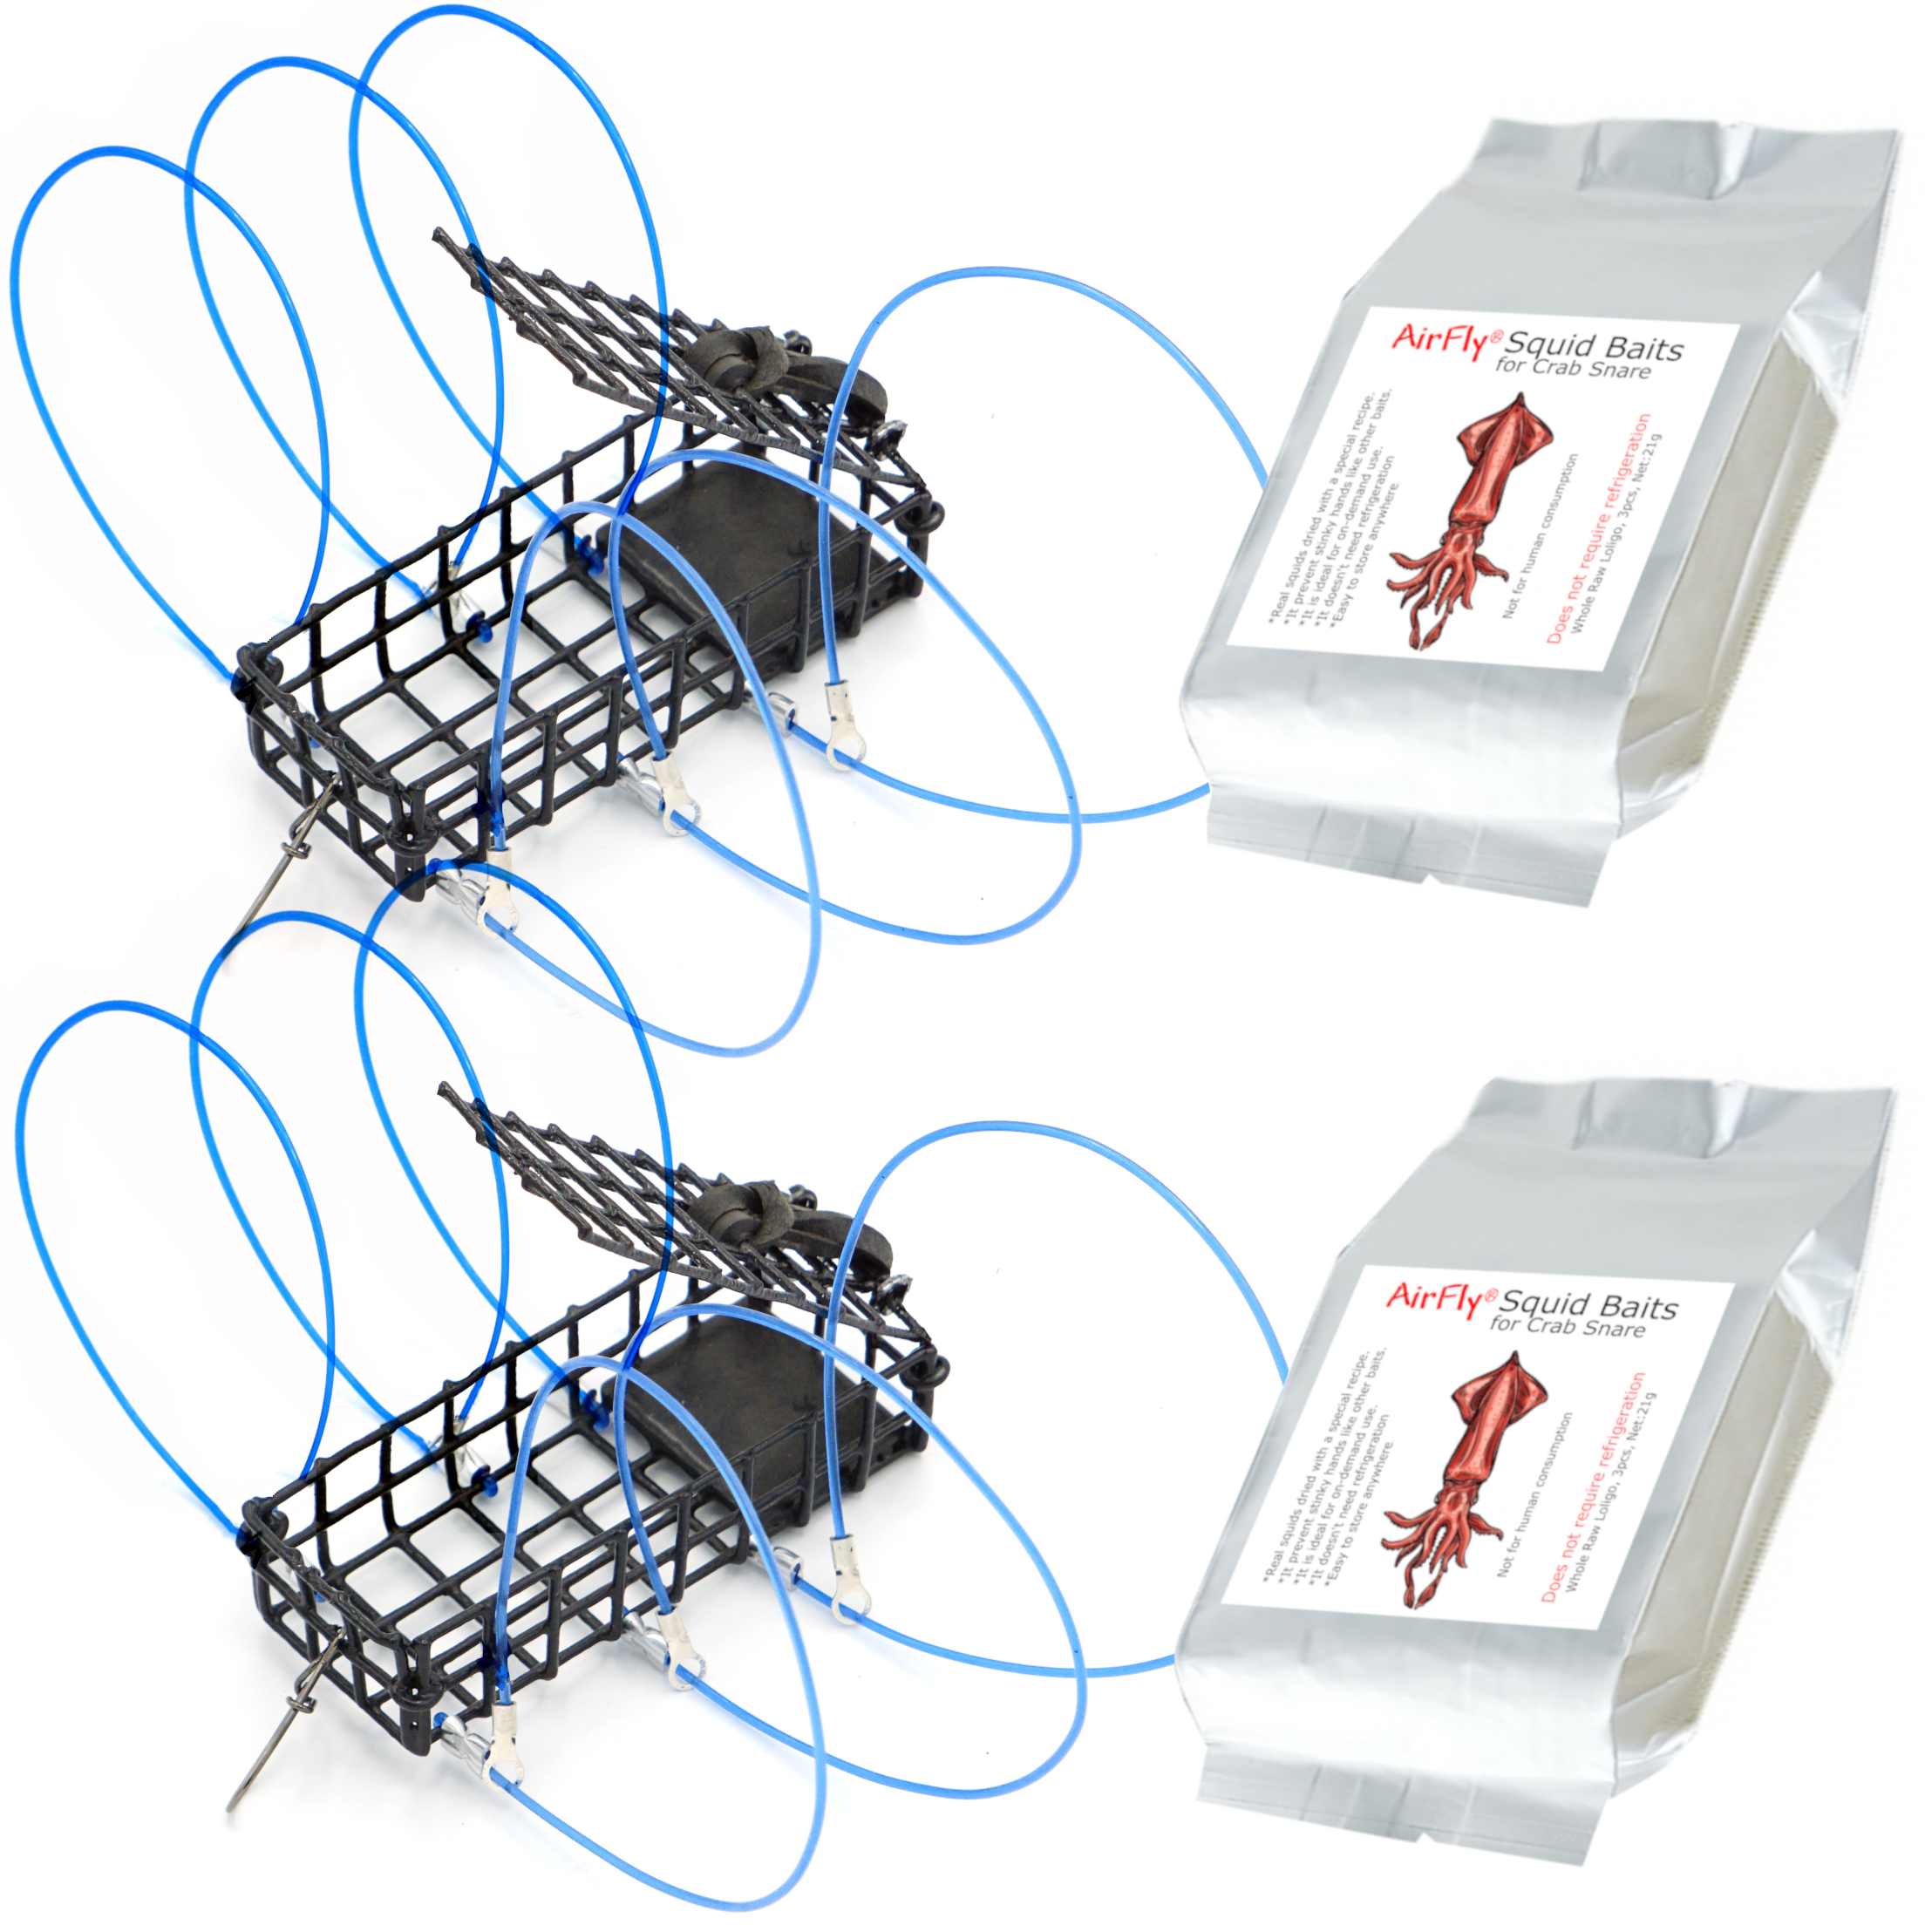 Windyun 2 Set Foldable Blue Crab Trap with Bait Clip and Orange Braided  Line Crab Trap Crabjaw Crab Snare Crab Nets for Crabbing Crab Lobster Fish